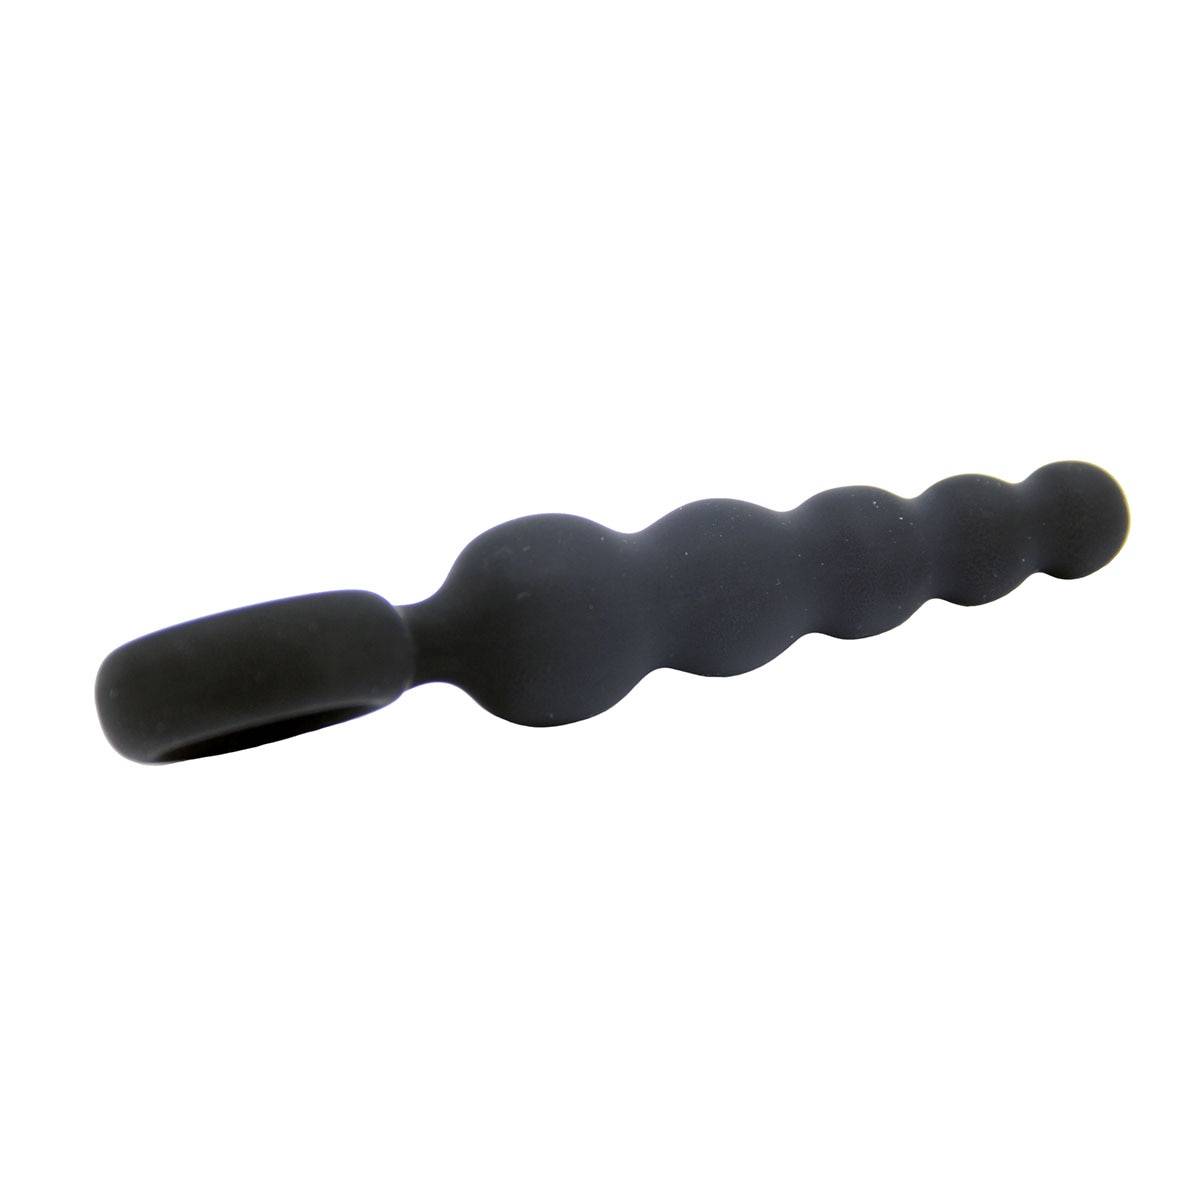 Anal Beads Plug in Black Color